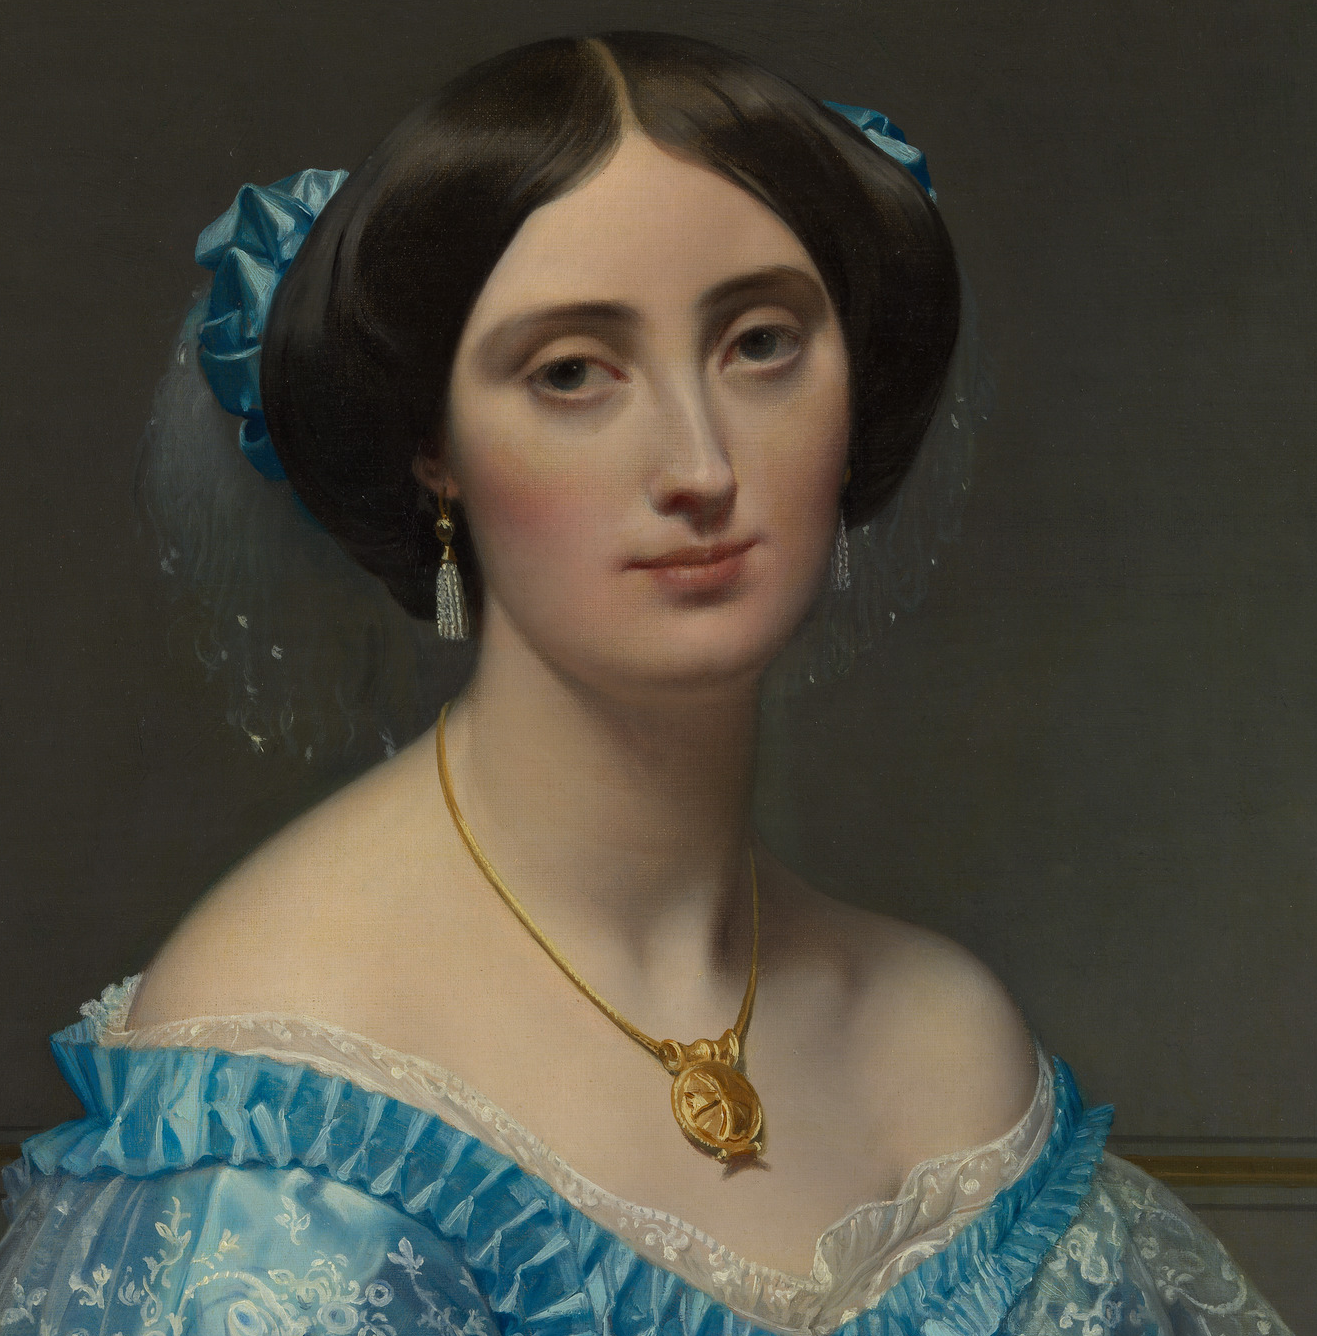 Wearing a gold chain and pendant. Princesse de Broglie, 1851-53 by Jean Auguste Dominique Ingres.